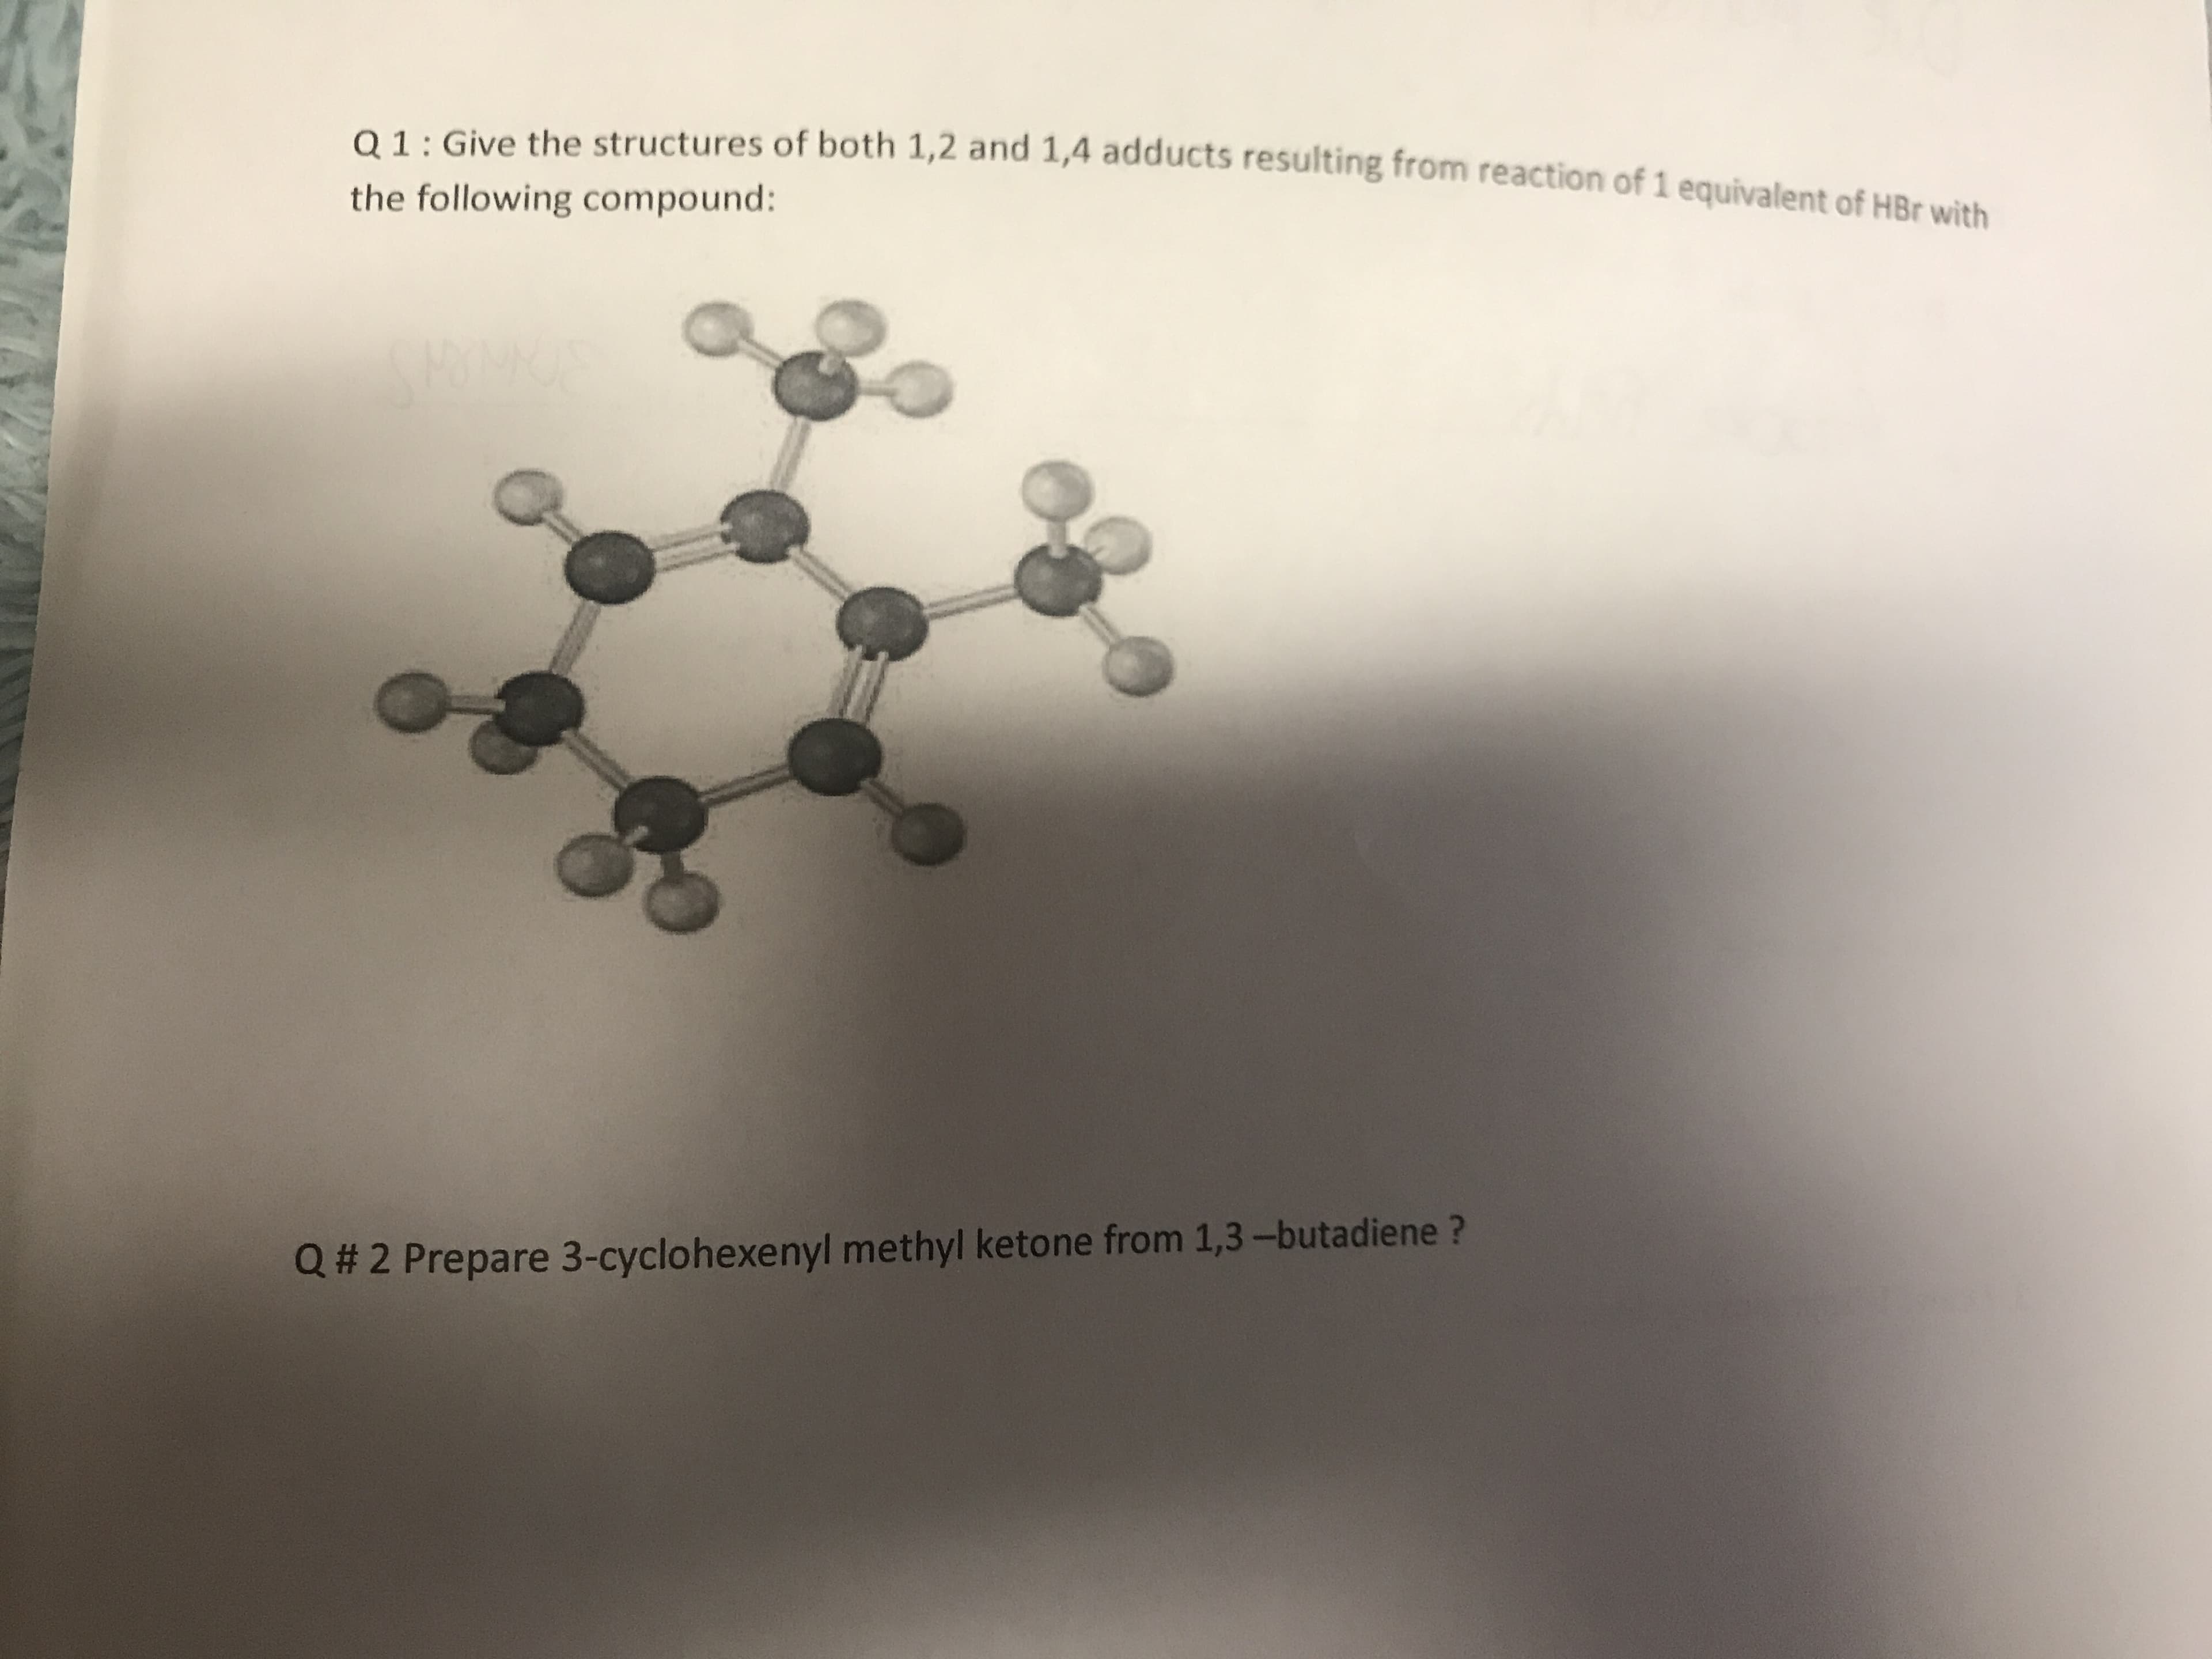 Q01: Give the structures of both 1,2 and 1,4 adducts resulting from reaction of 1 equivalent of HBr wit
1 Give the structures of both 1,2 and 1,4 adducts resultin
the following compound:
Q # 2 Prepare 3-cyclohexenyl methyl ketone from 1,3-butadiene ?
